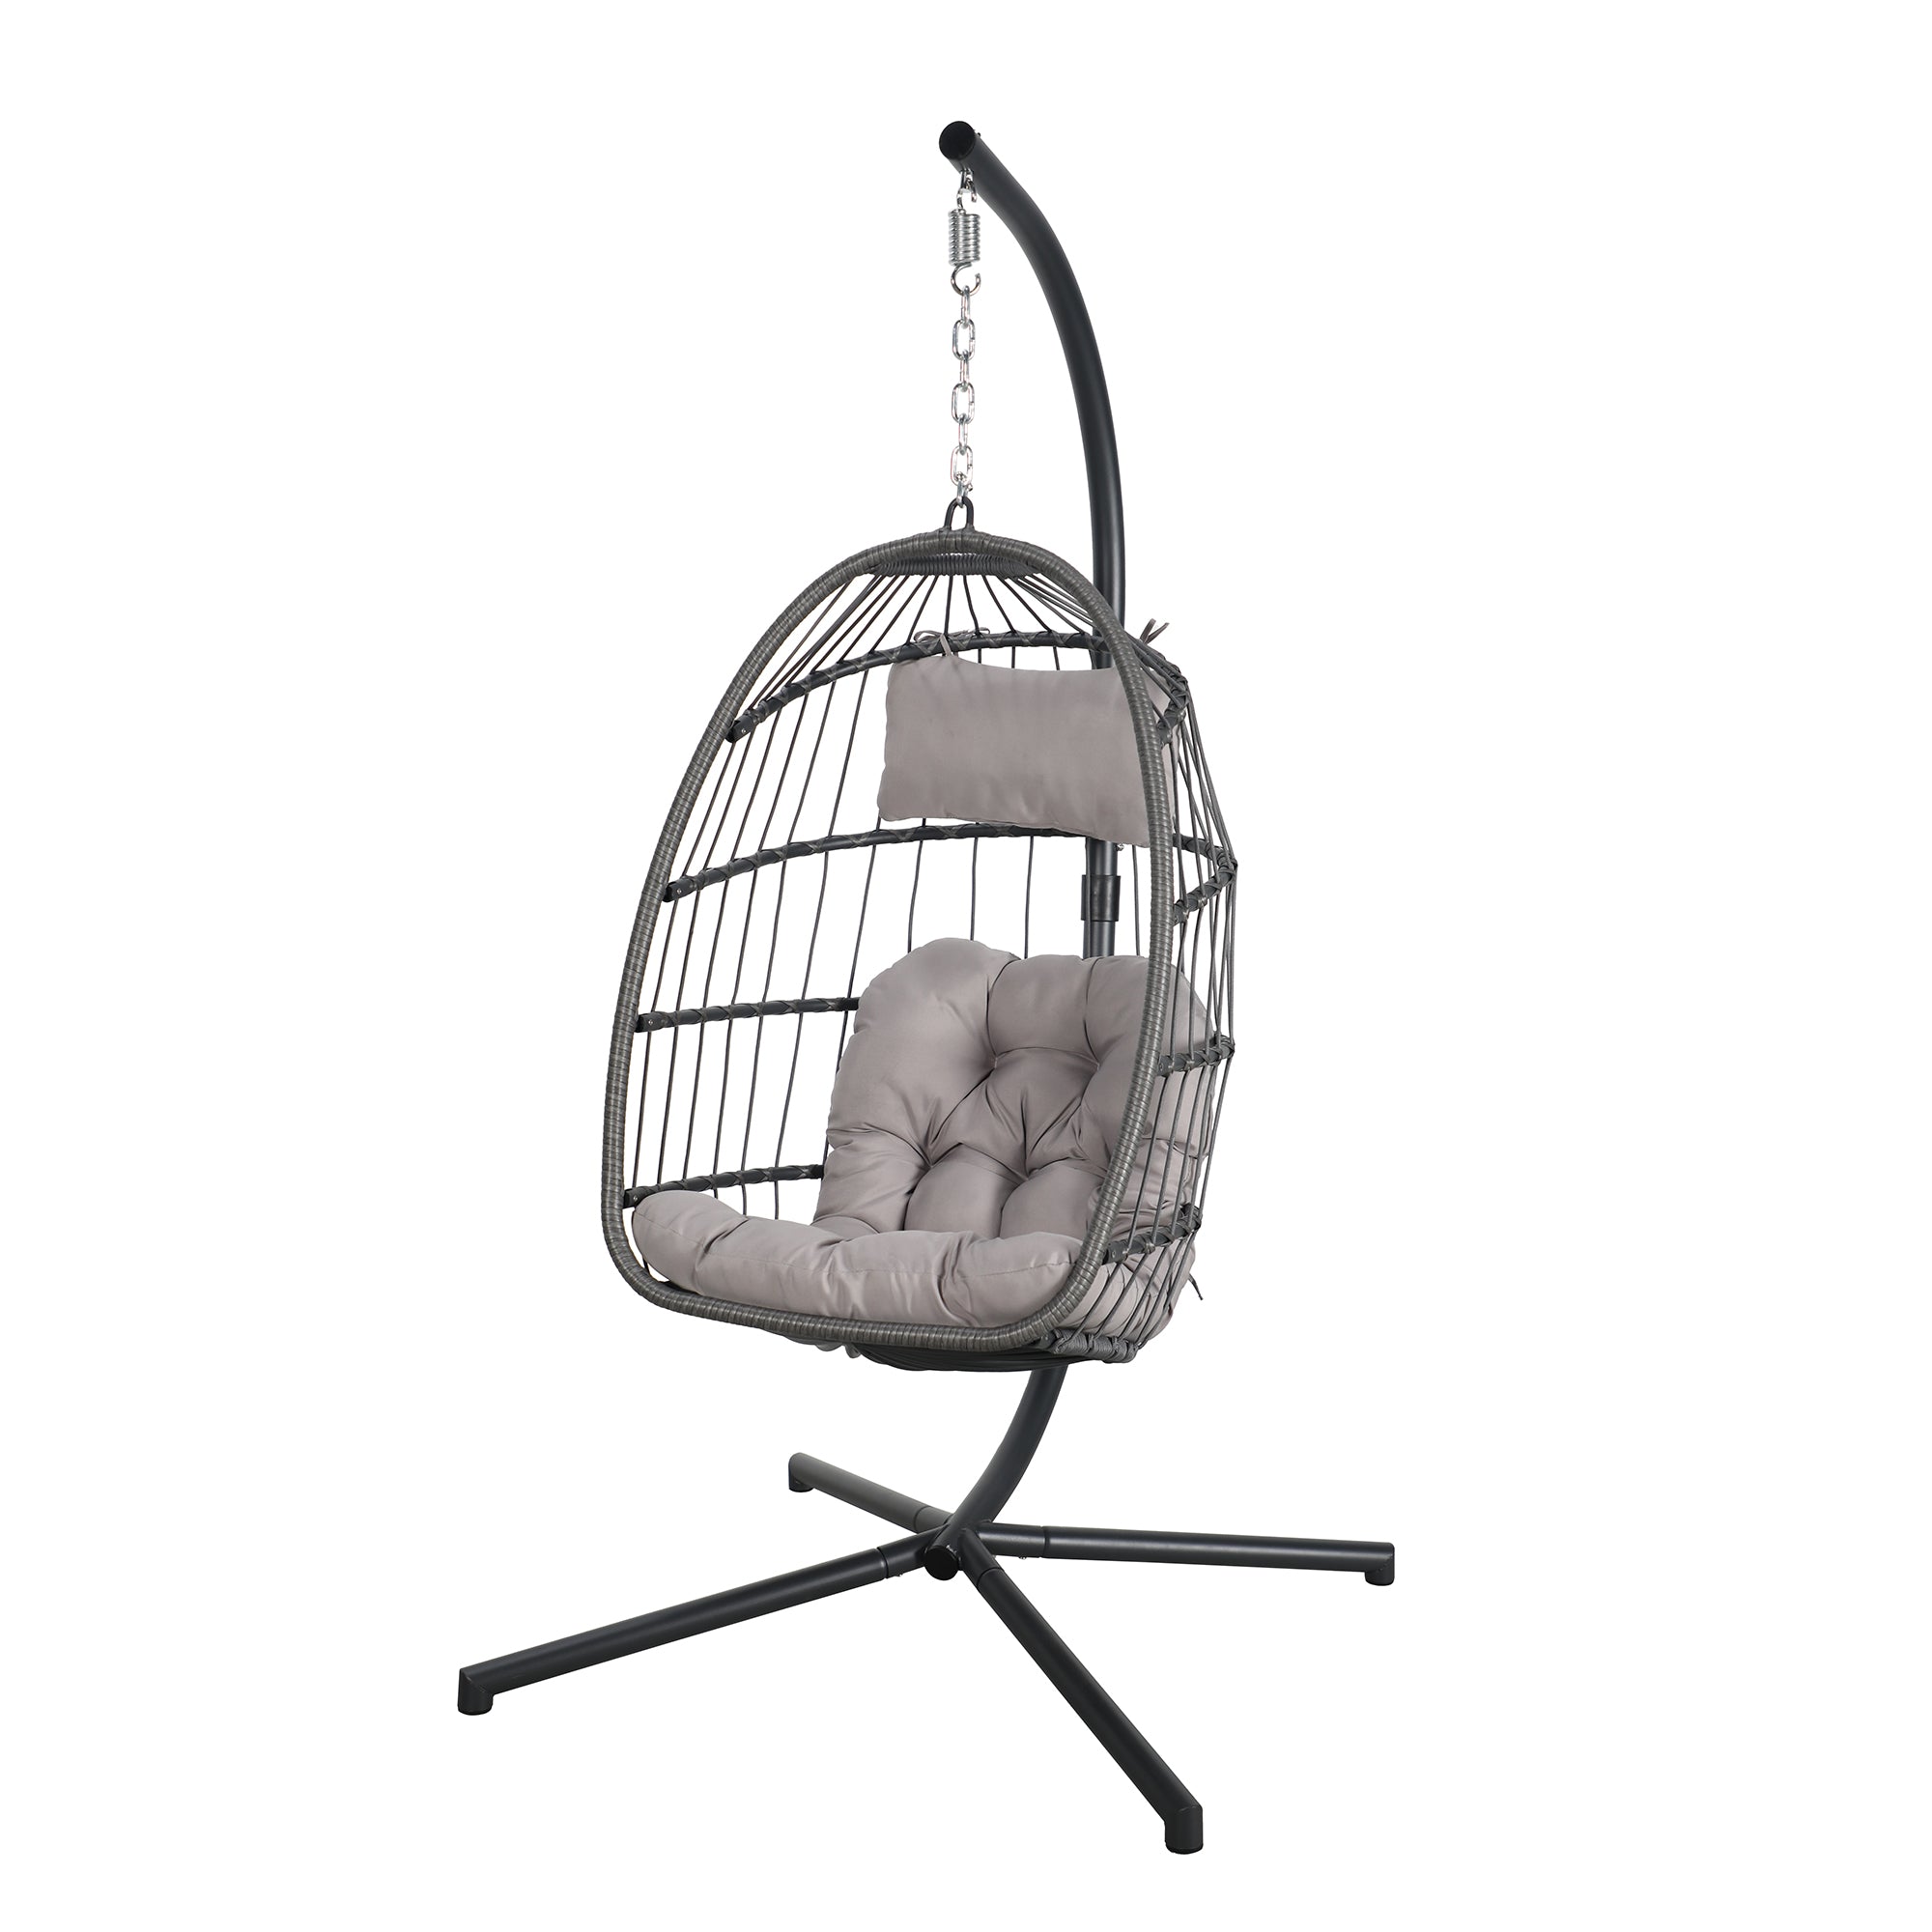 Leura Hanging Egg Chair with Stand, Light Grey